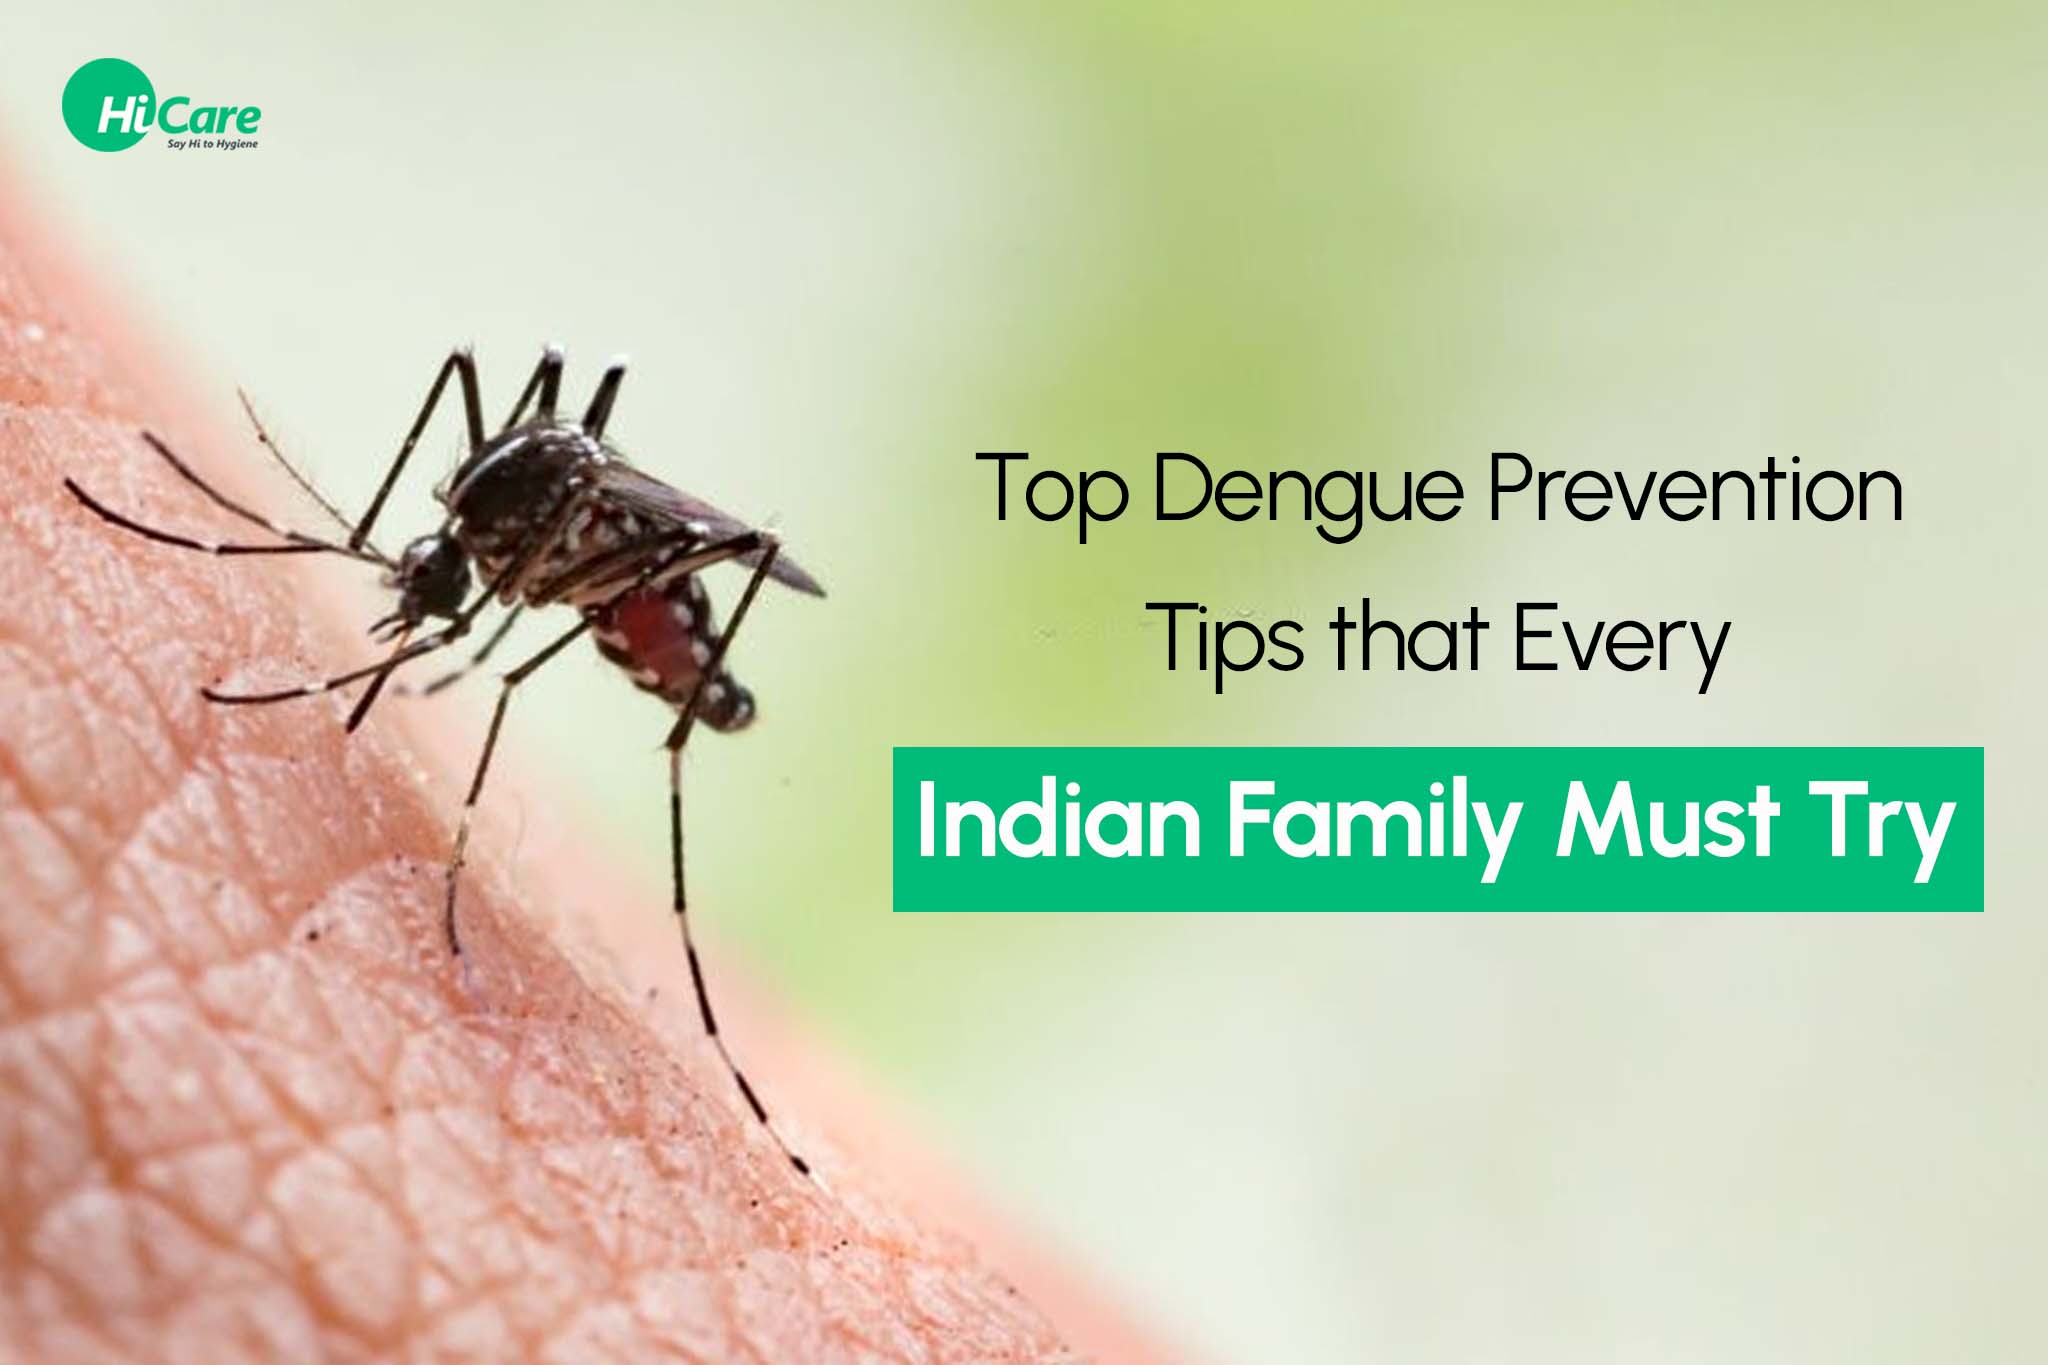 5 Dengue Prevention Tips Every Indian Family Must Try | HiCare